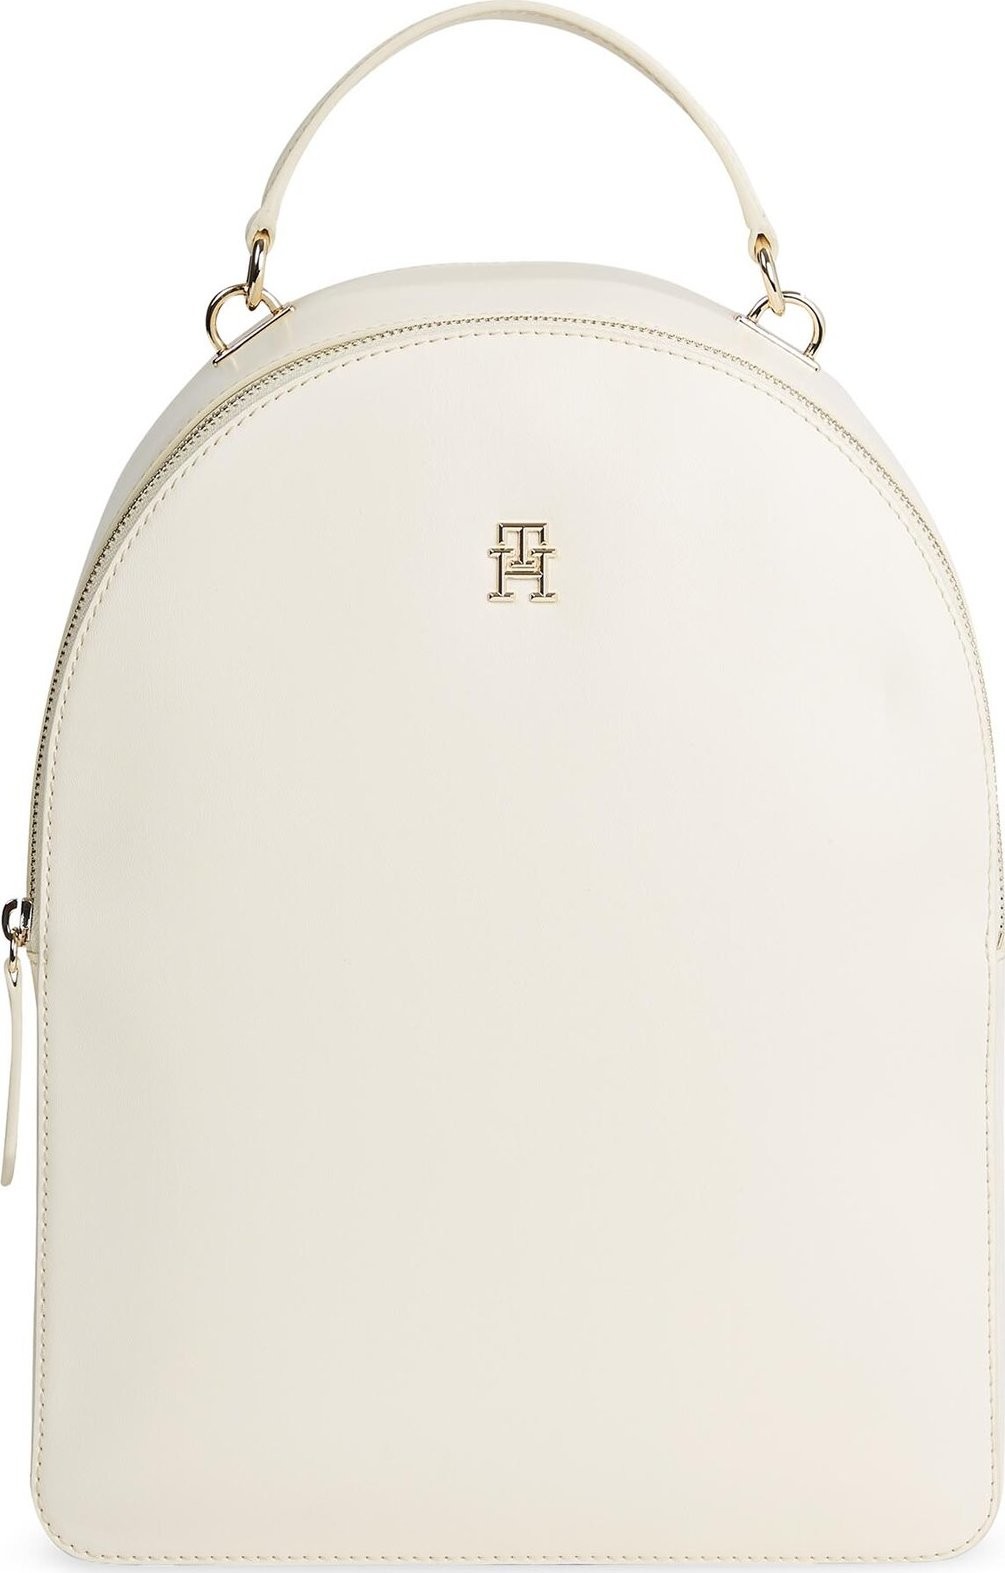 Batoh Tommy Hilfiger Th Refined Backpack AW0AW15722 Calico AEF